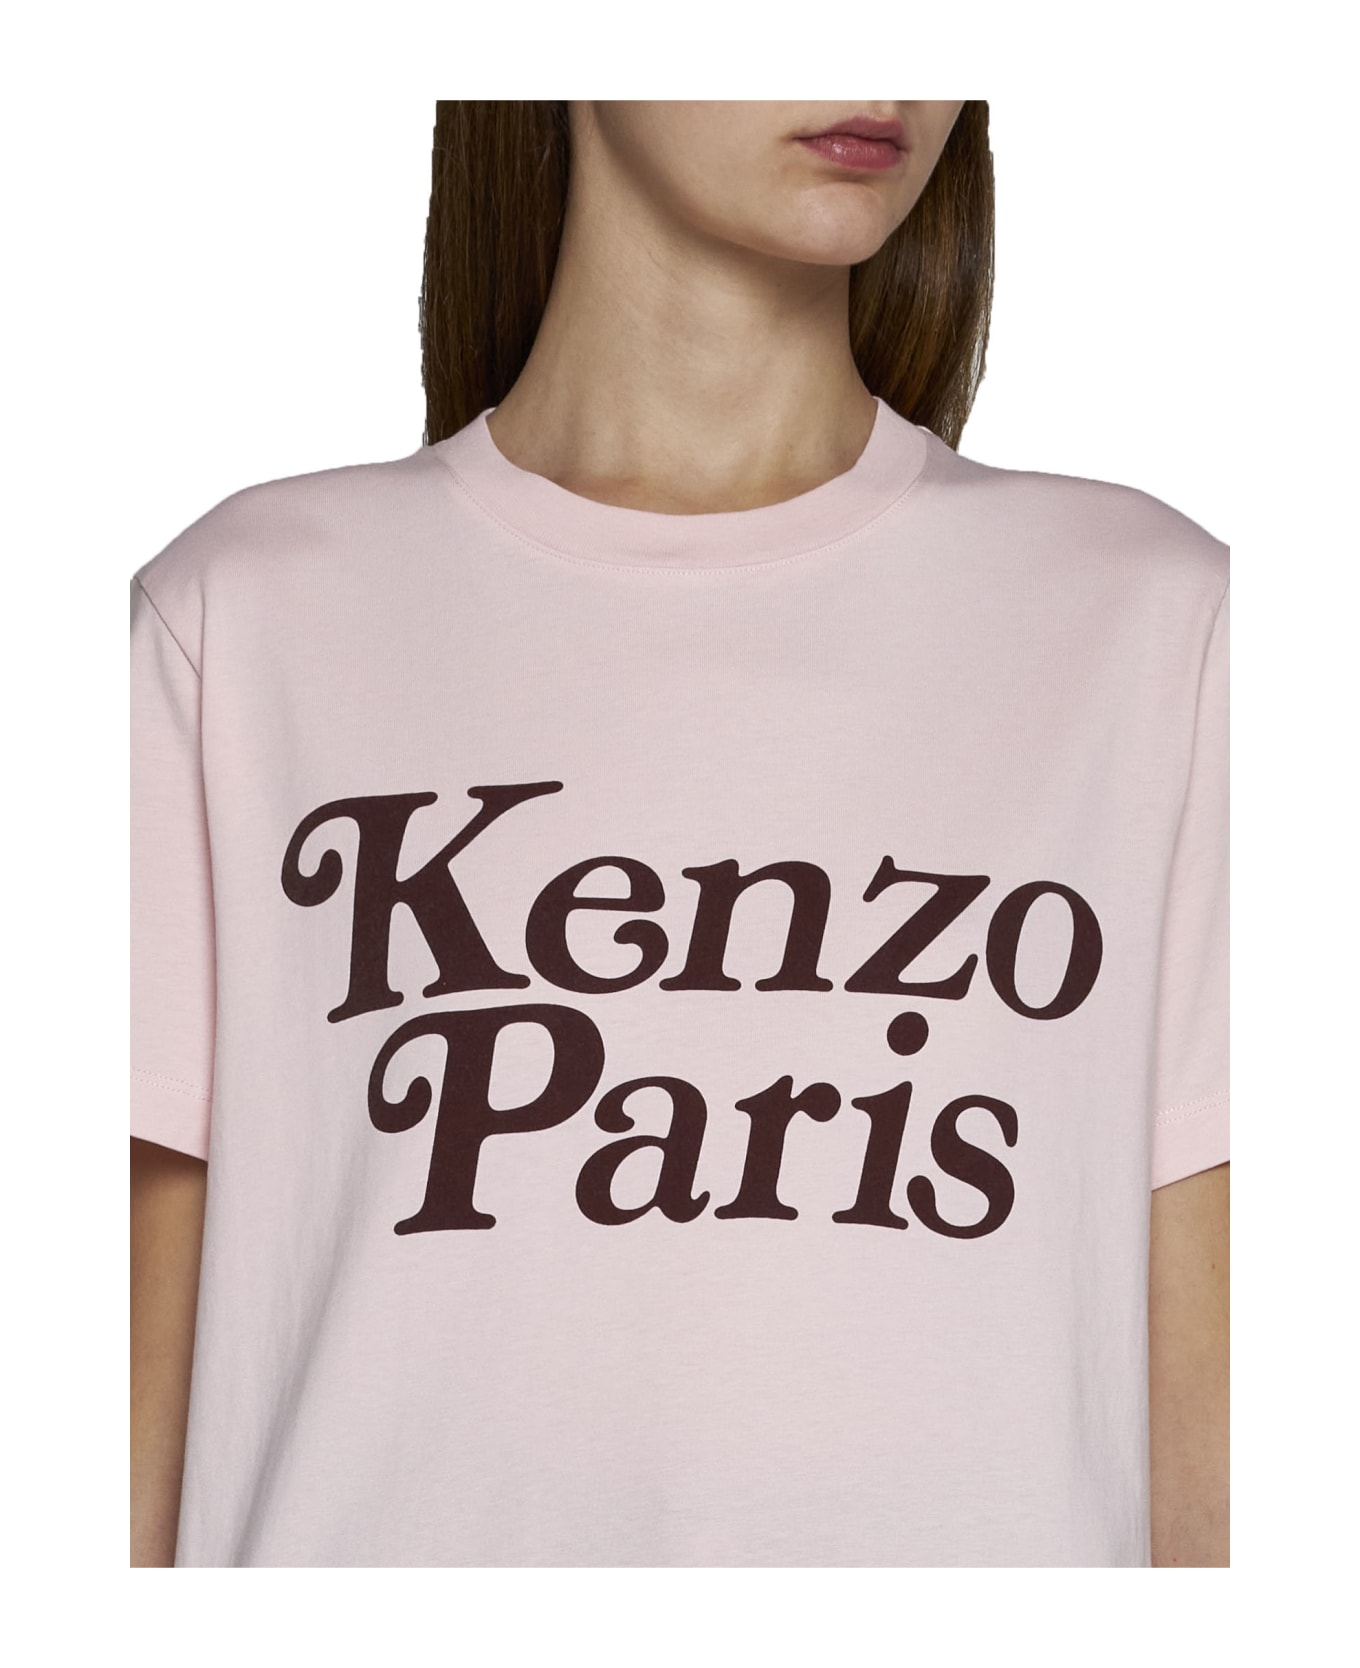 Kenzo T-Shirt - Faded pink Tシャツ